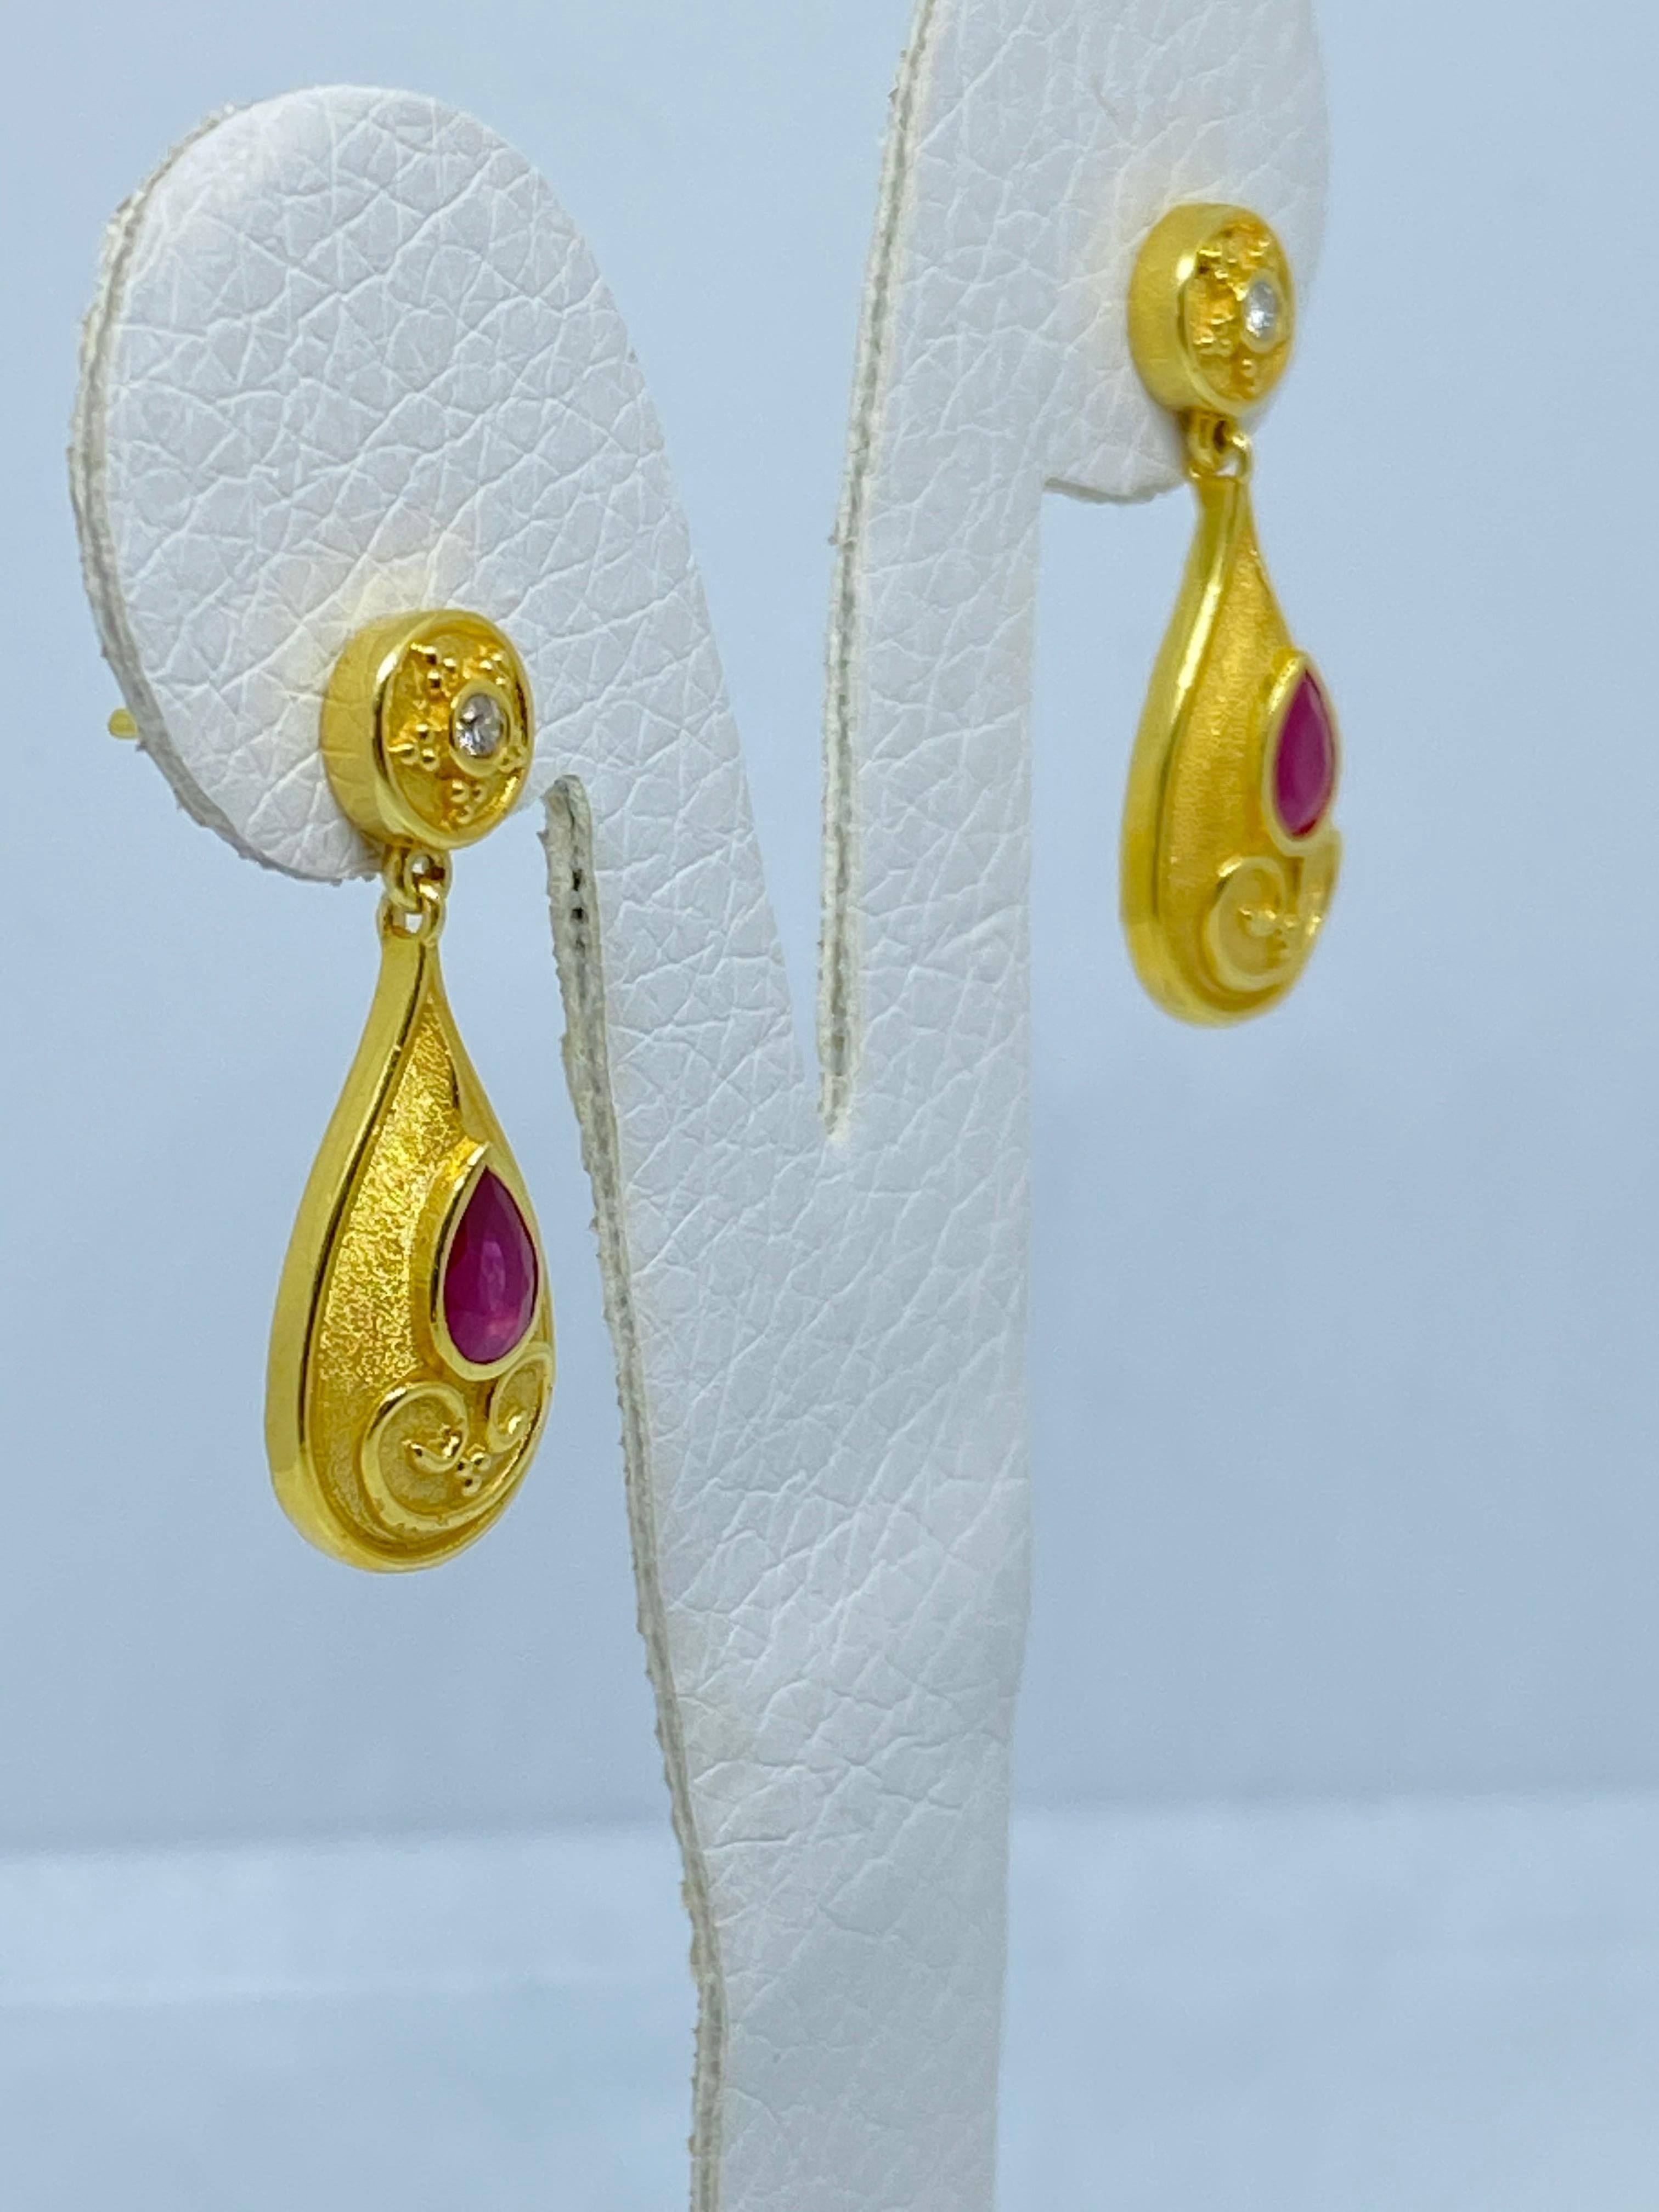 These S.Georgios designer earrings are hand made from 18 Karat Yellow Gold and decorated with Byzantine-era style granulation workmanship. These beautiful earrings feature 2 Brilliant cut Diamonds total weight of 0.10 Carats, complemented with 2